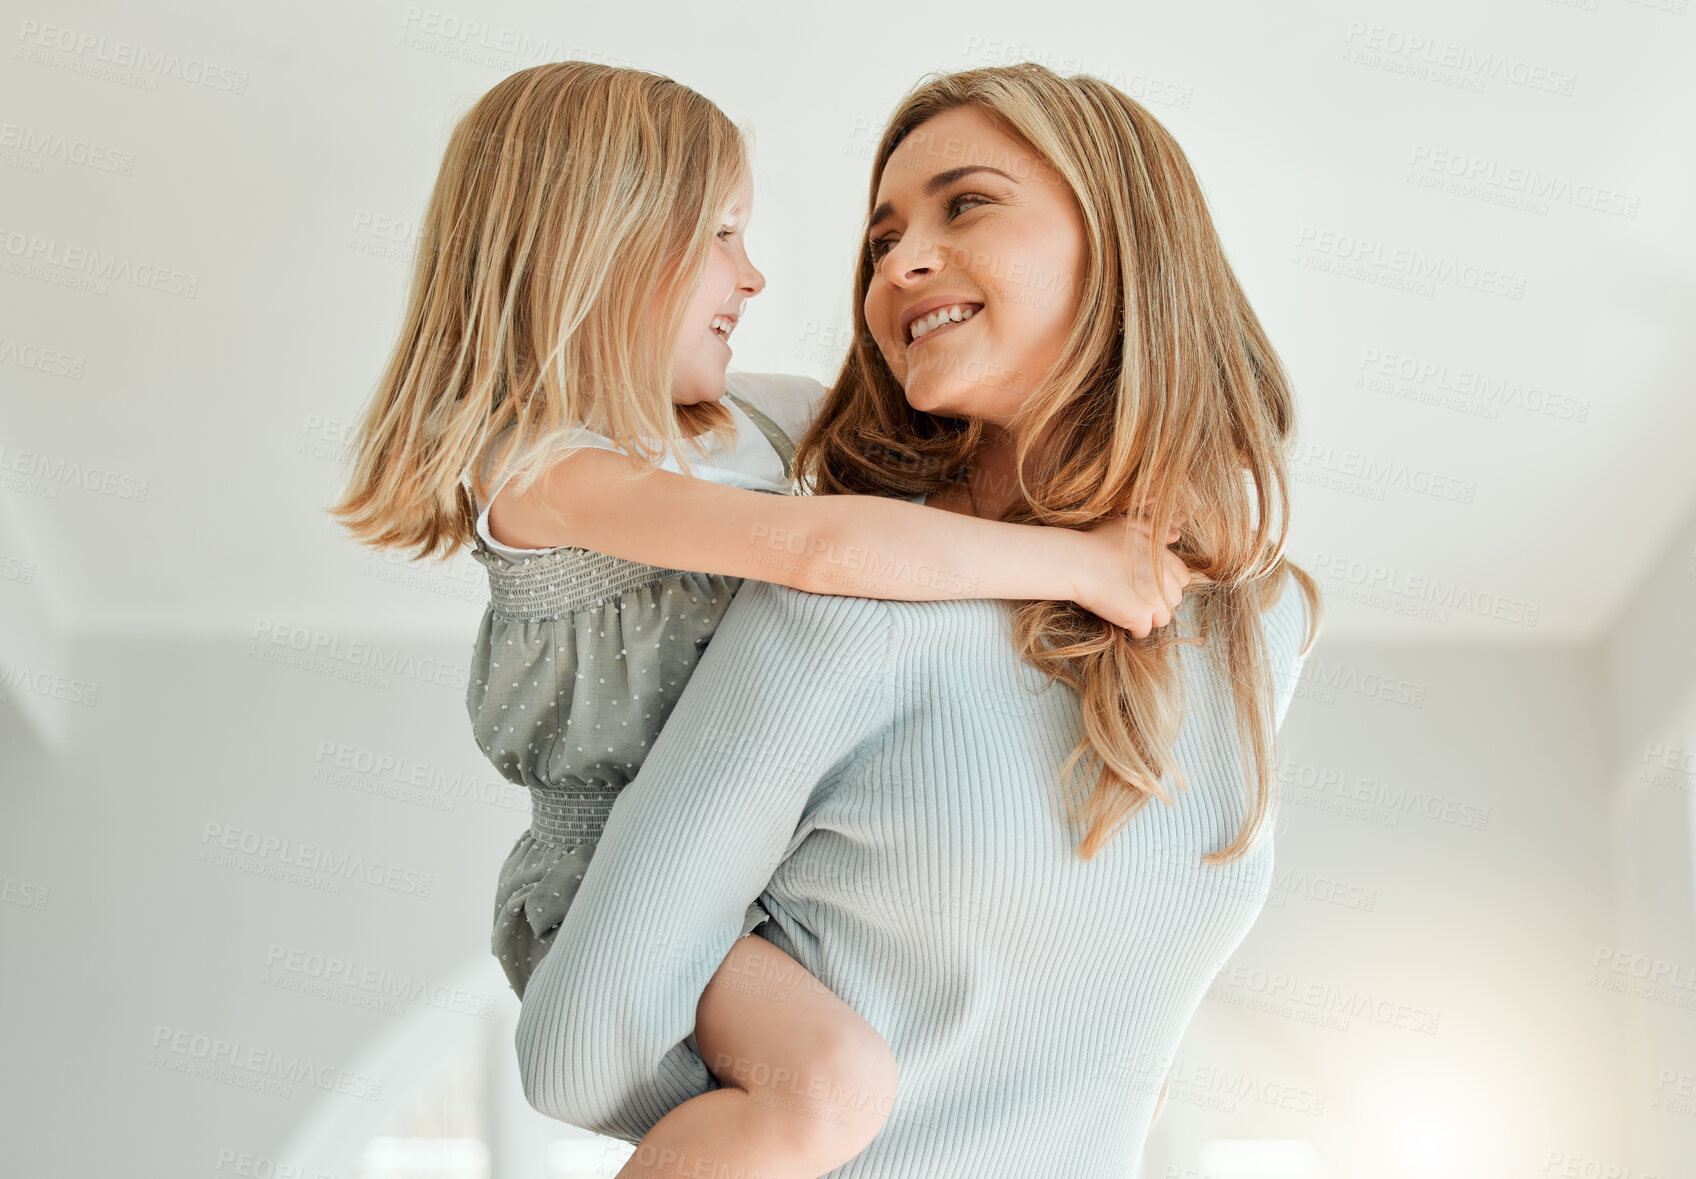 Buy stock photo Shot of an attractive young woman bonding with her daughter and giving her a piggyback ride at home